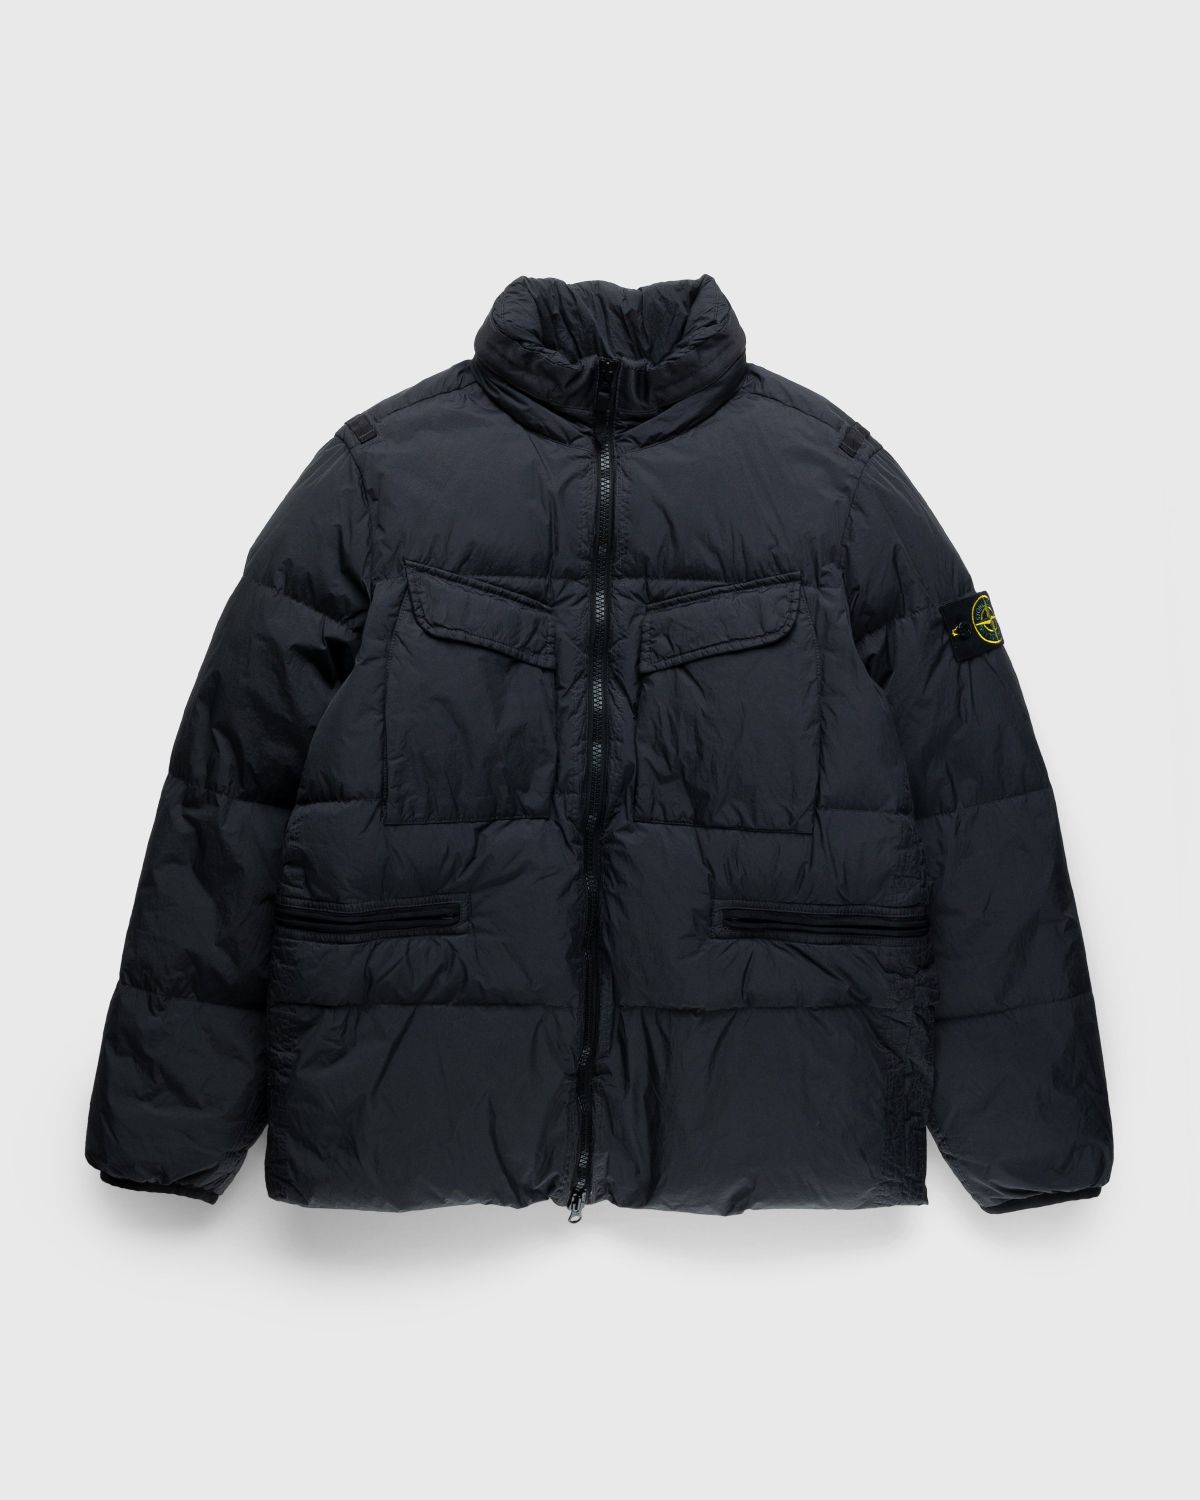 Stone Island – Garment-Dyed Crinkle Down Jacket Charcoal - Outerwear - Grey - Image 1